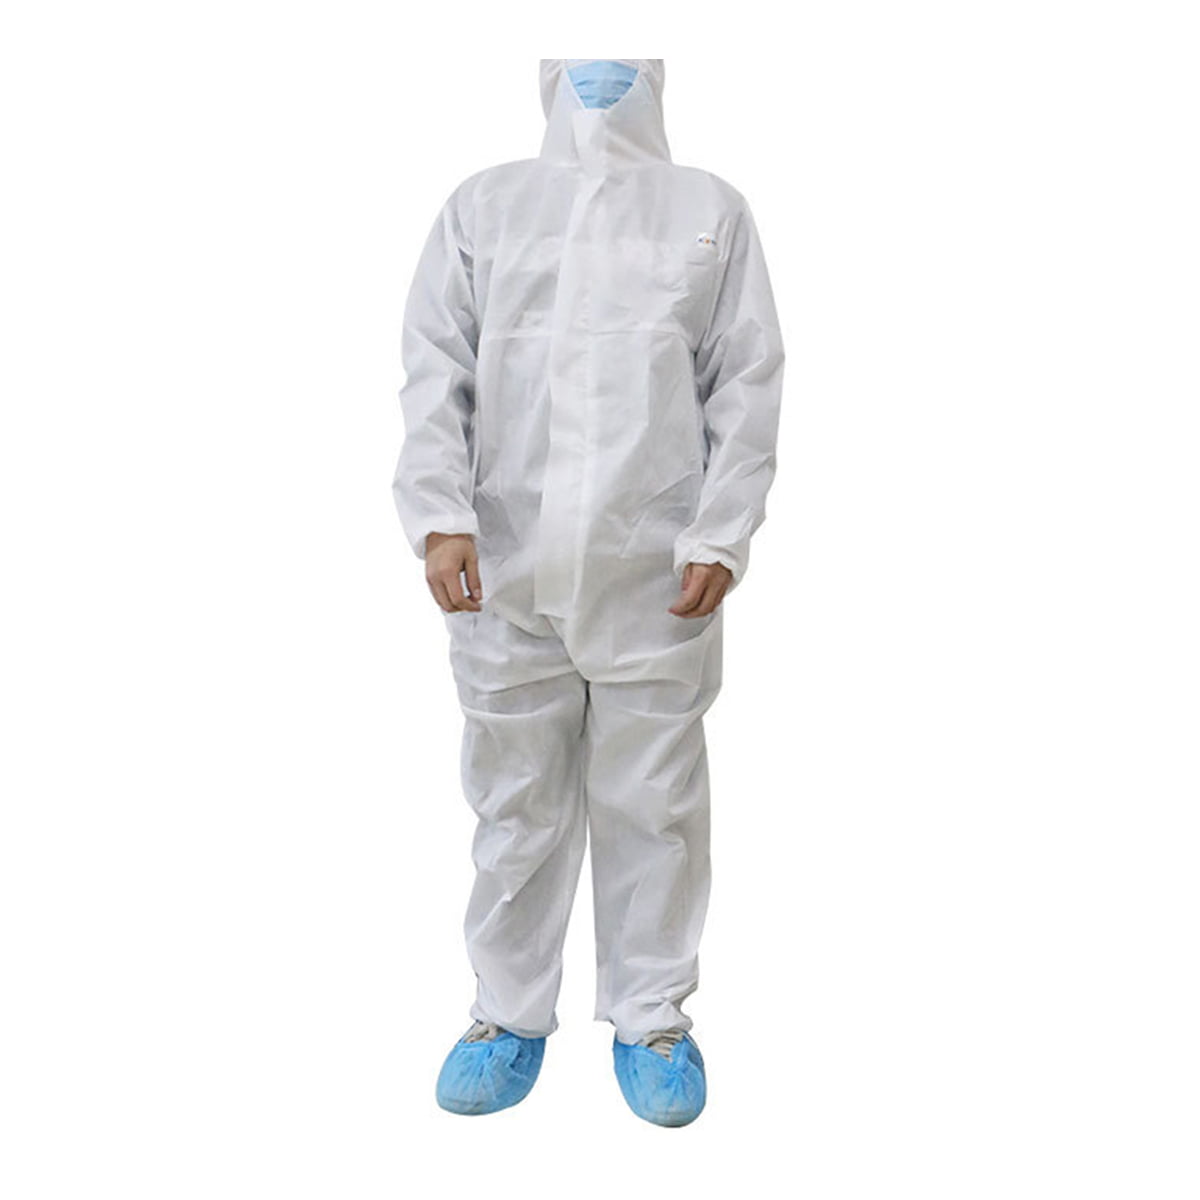 Disposable White Coveralls Painters Protective Overall Boiler Suit Hood Lab Coat 